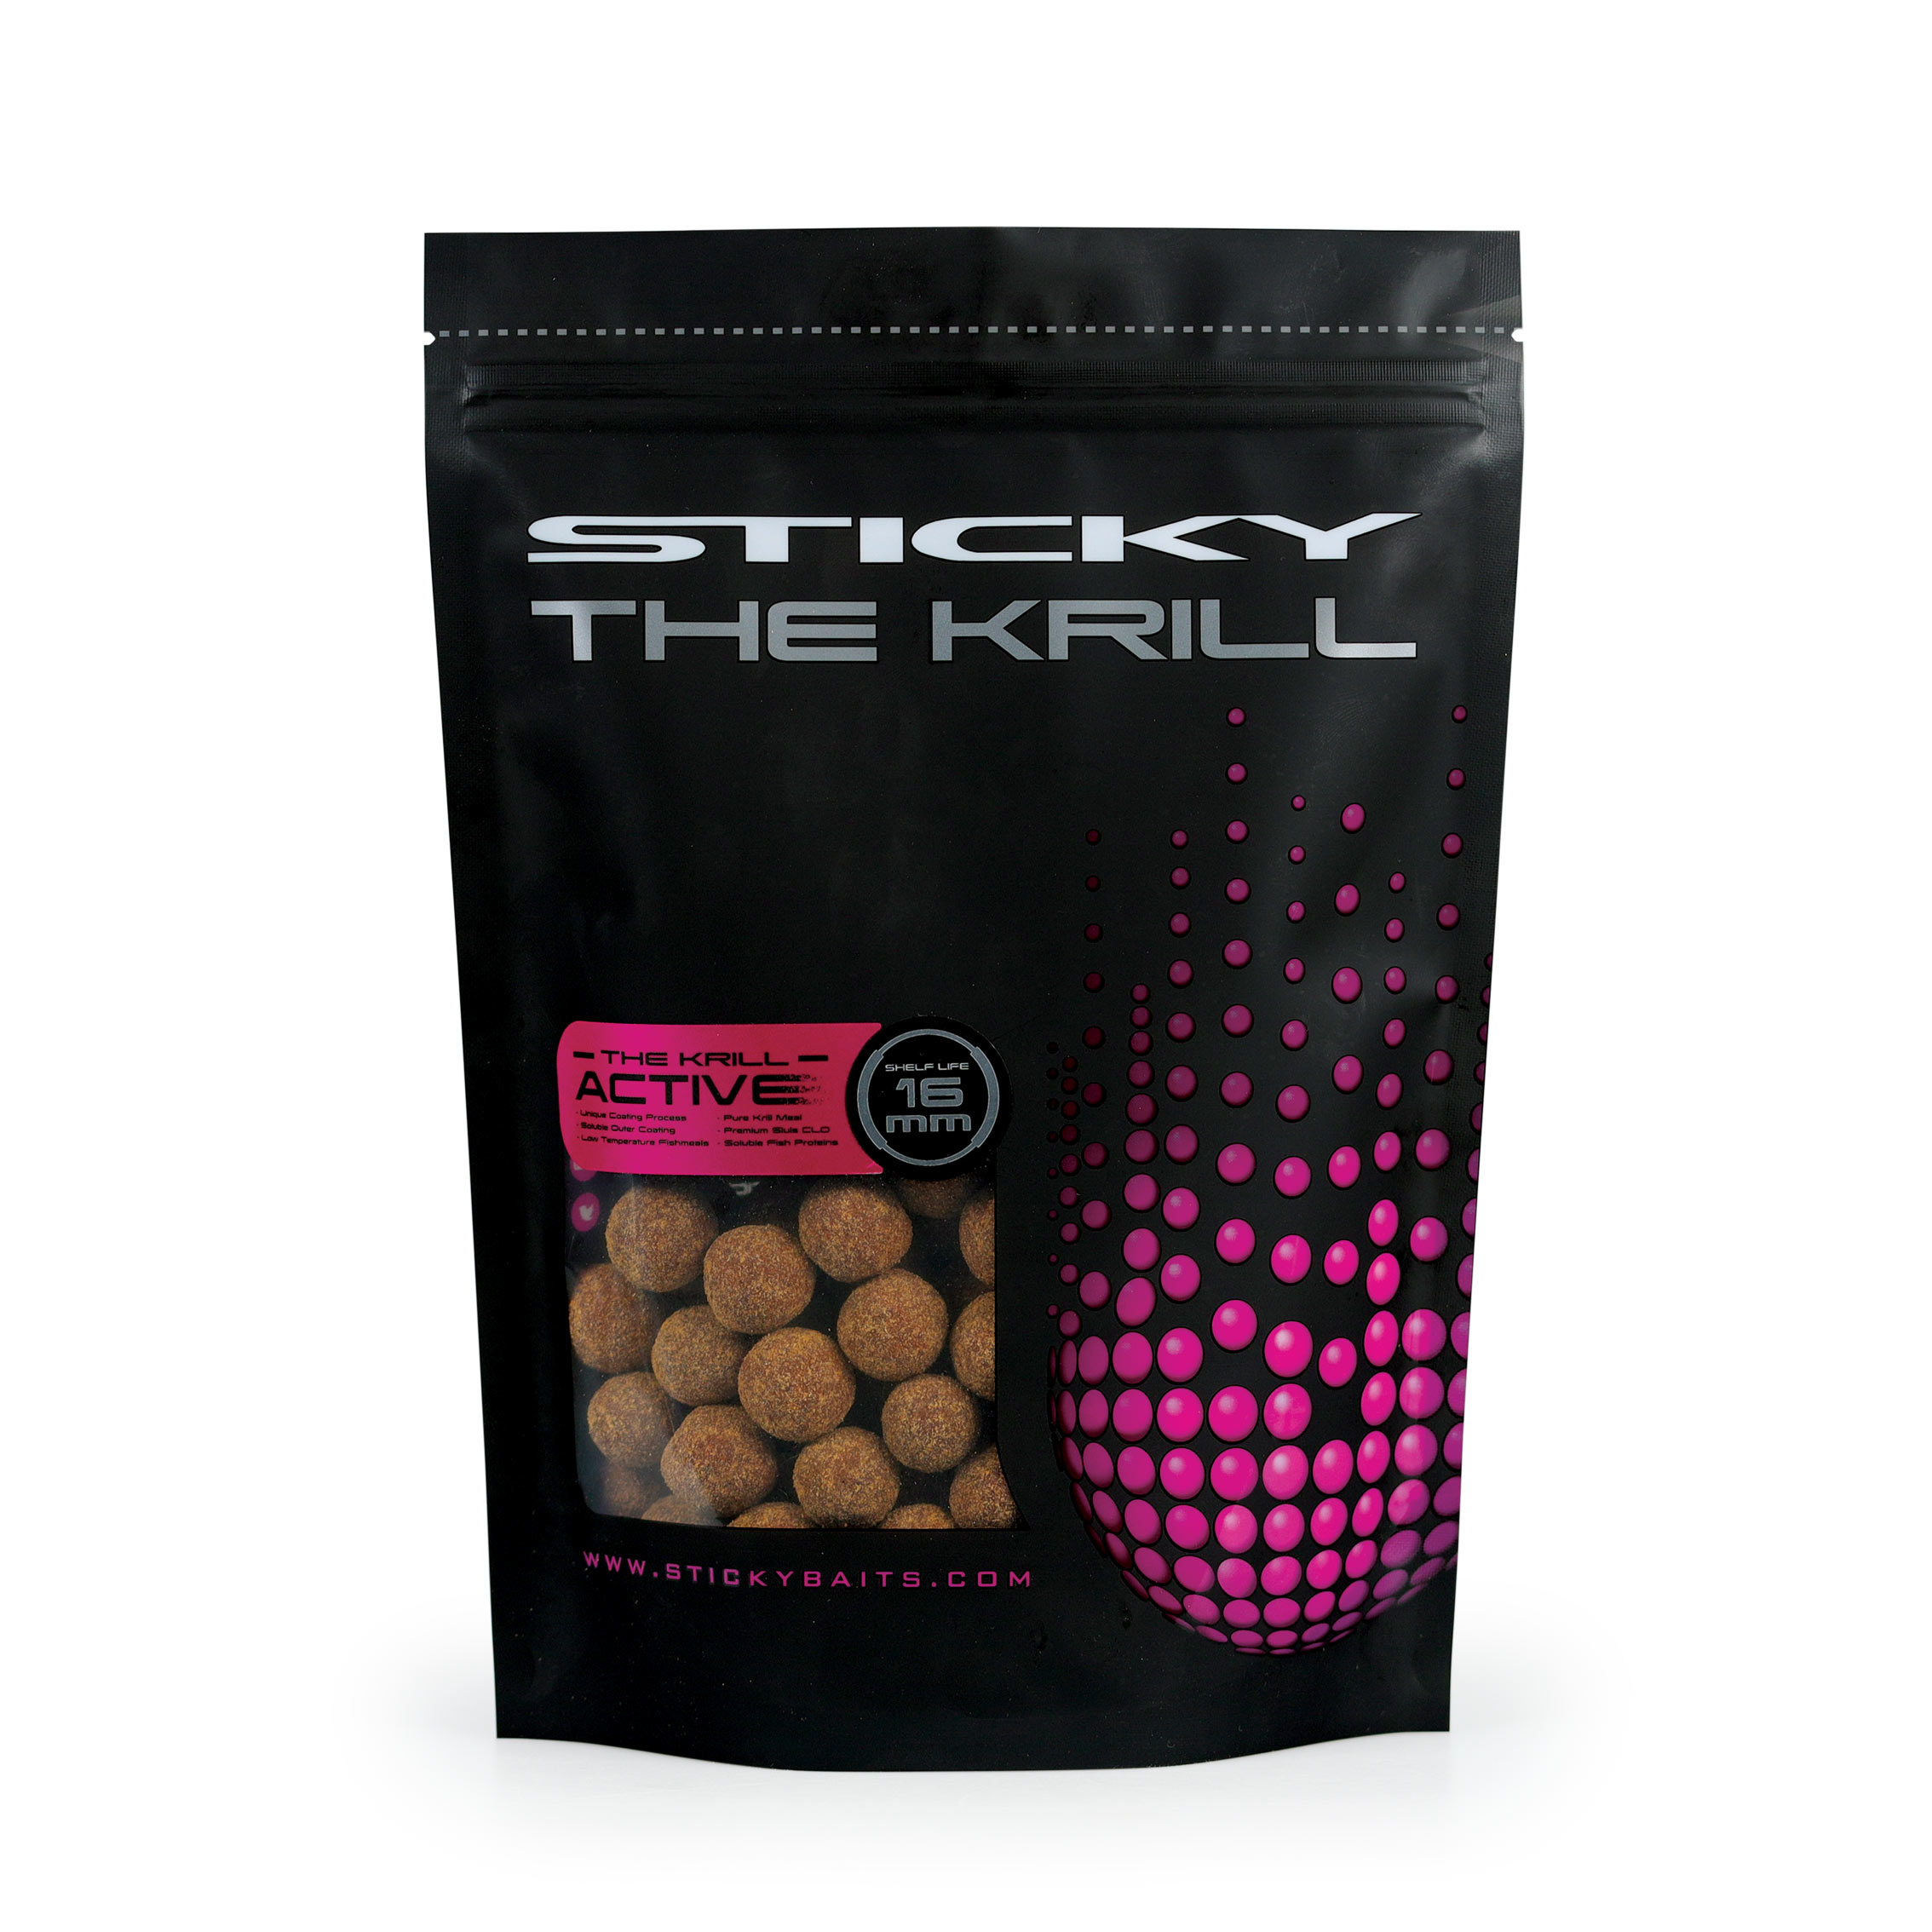 Sticky Baits - Products - The Krill Active Freezer - Carp Fishing Bait